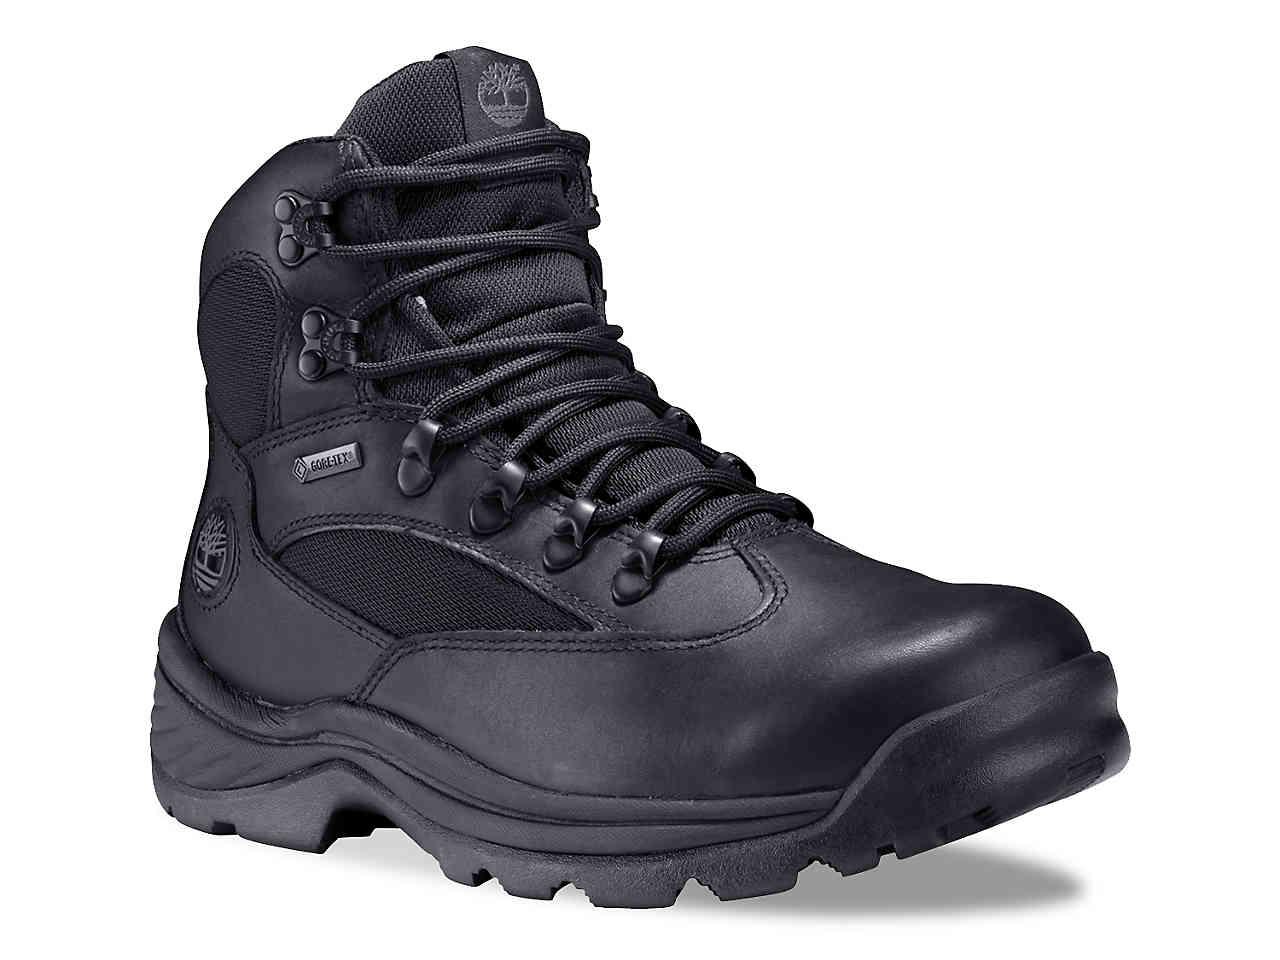 Timberland Leather Chocorua Trail 2 Hiking Boot in Black for Men - Lyst